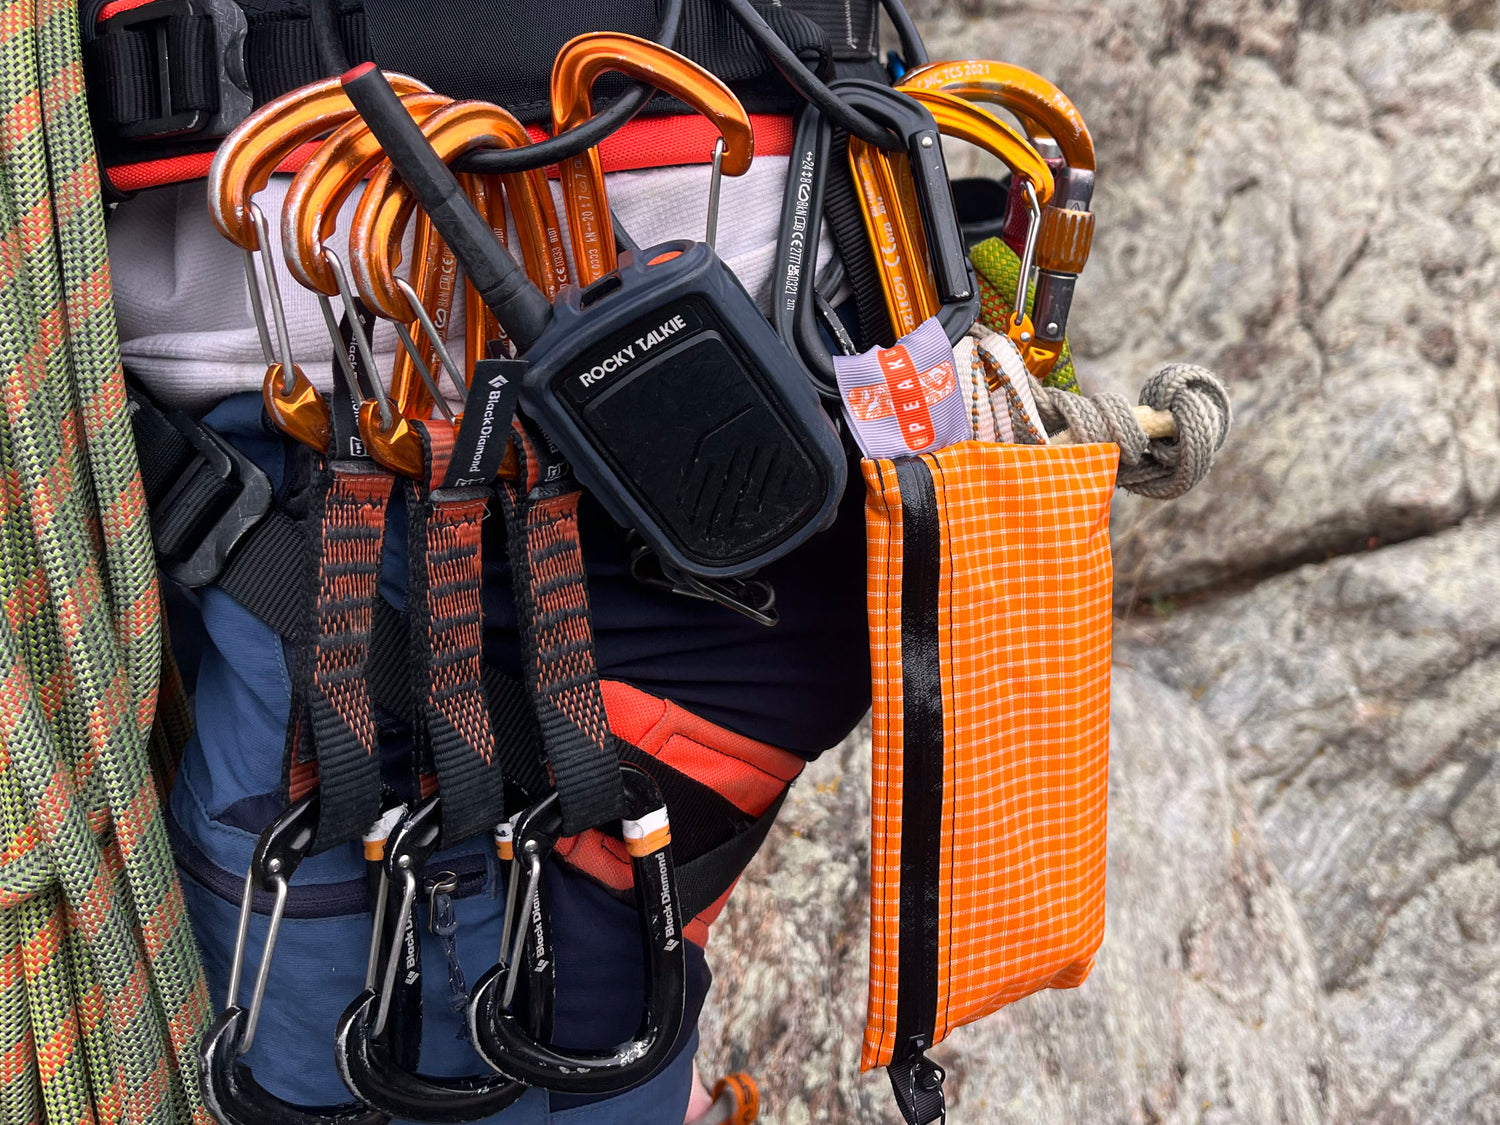 A peak first aid kit on a climbers harness close up